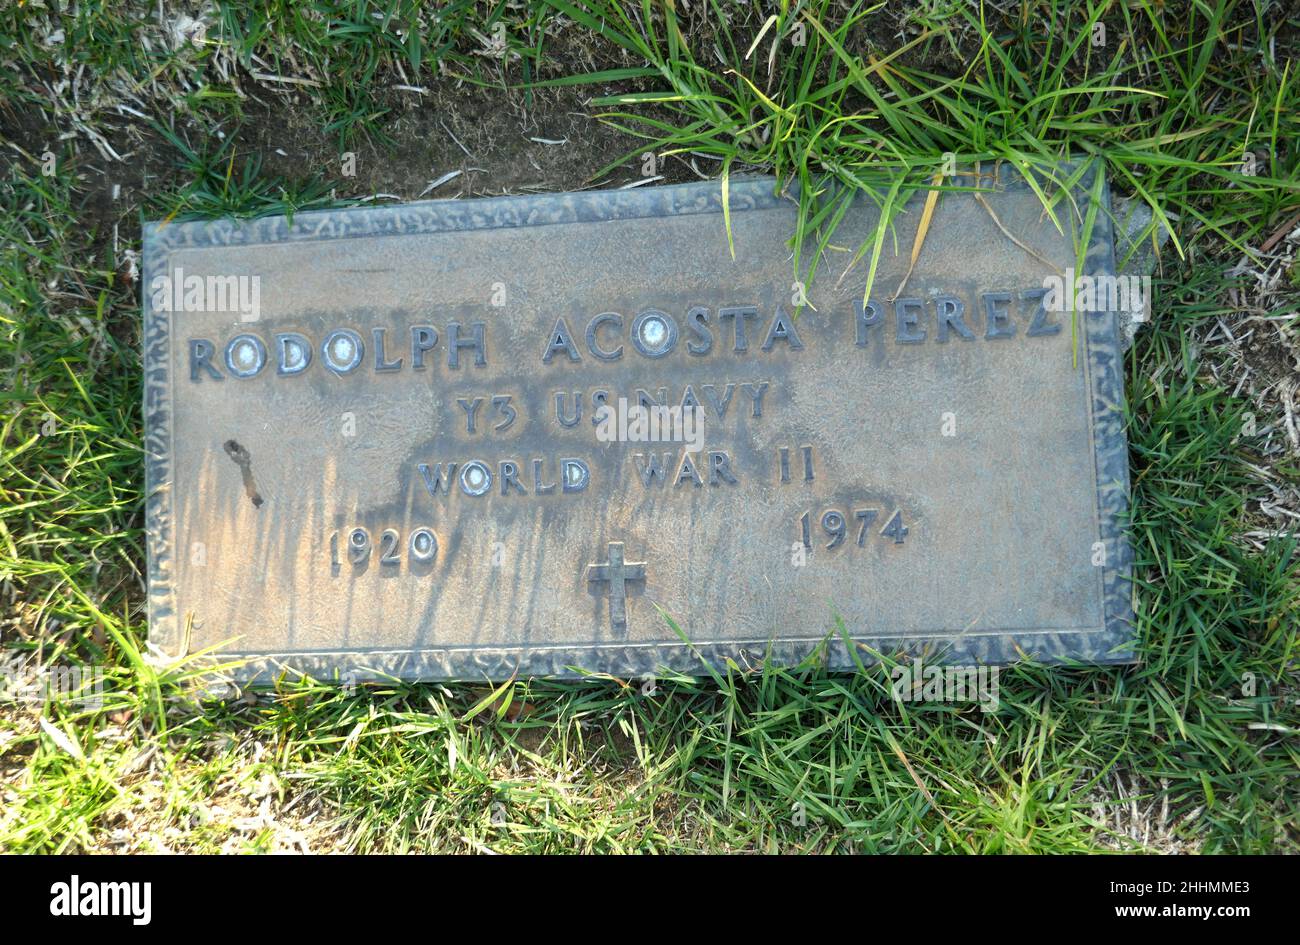 The Quest for the Grave of Pablo Acosta